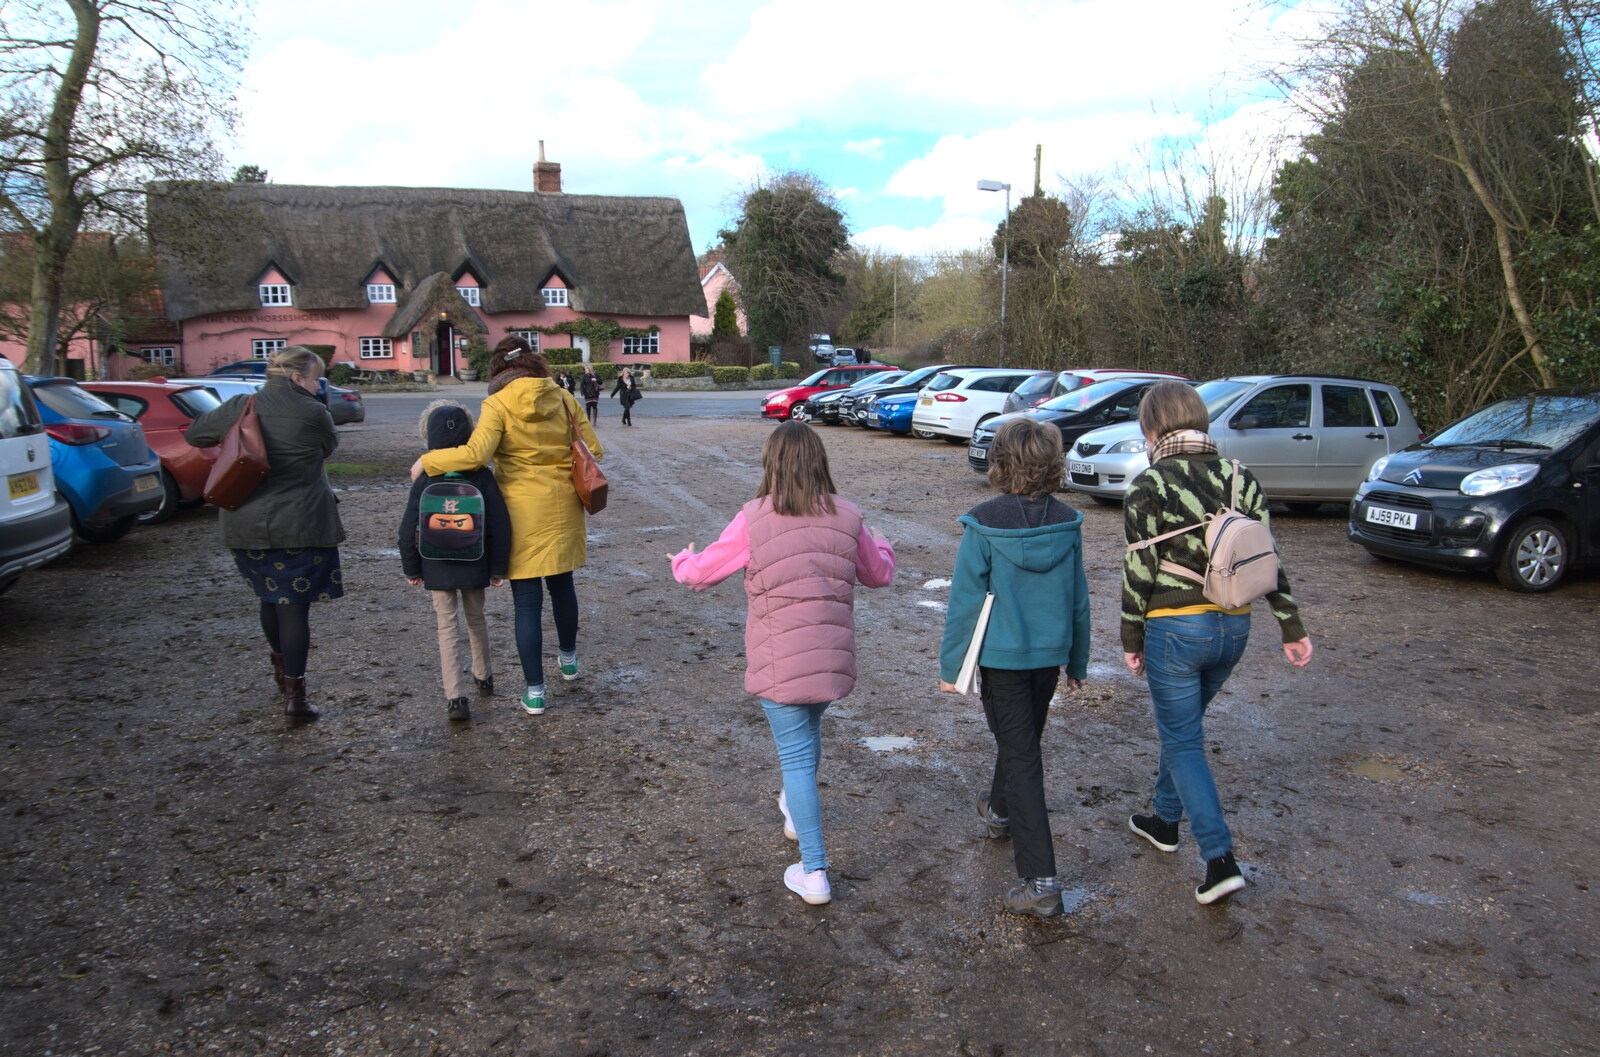 The gang head across the car park from Sunday Lunch and a SwiftKey Trip to Nando's, Thornham and Bayswater - 22nd February 2020